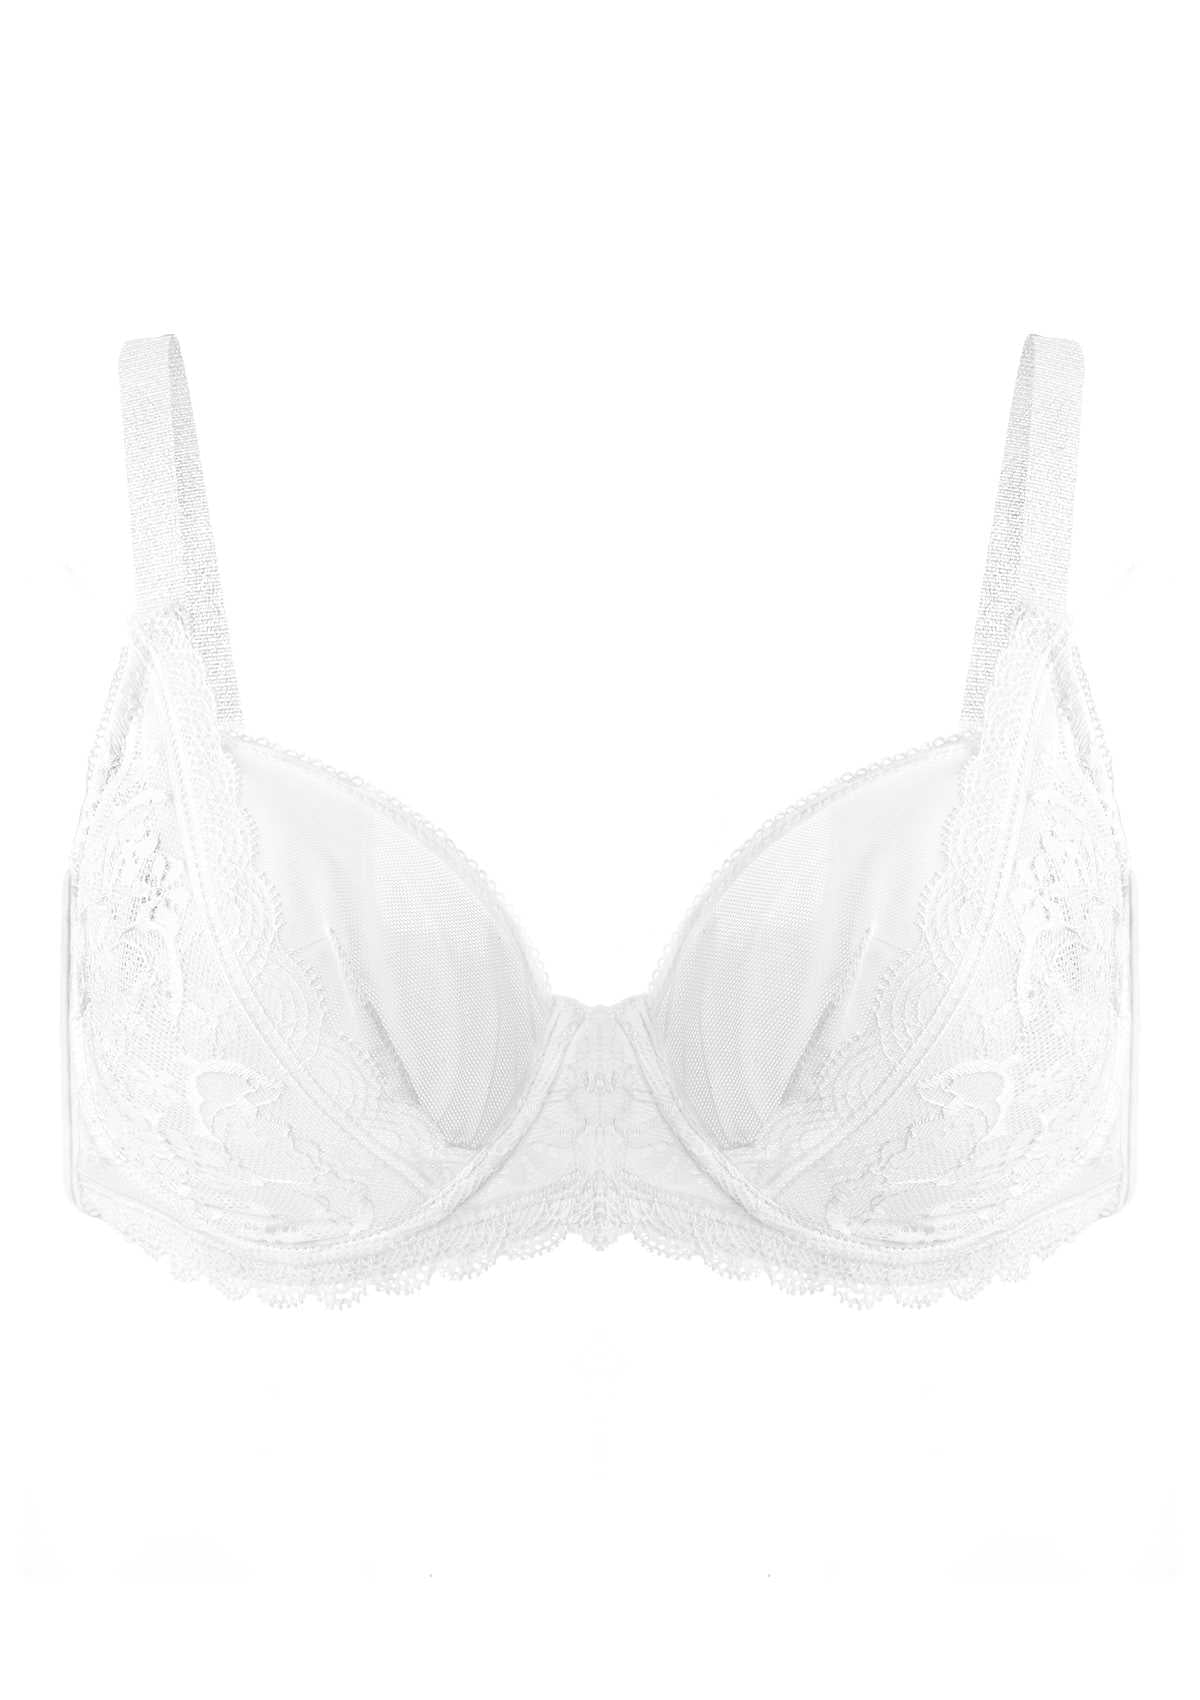 HSIA Anemone Big Bra: Best Bra For Lift And Support, Floral Bra - Light Blue / 38 / C